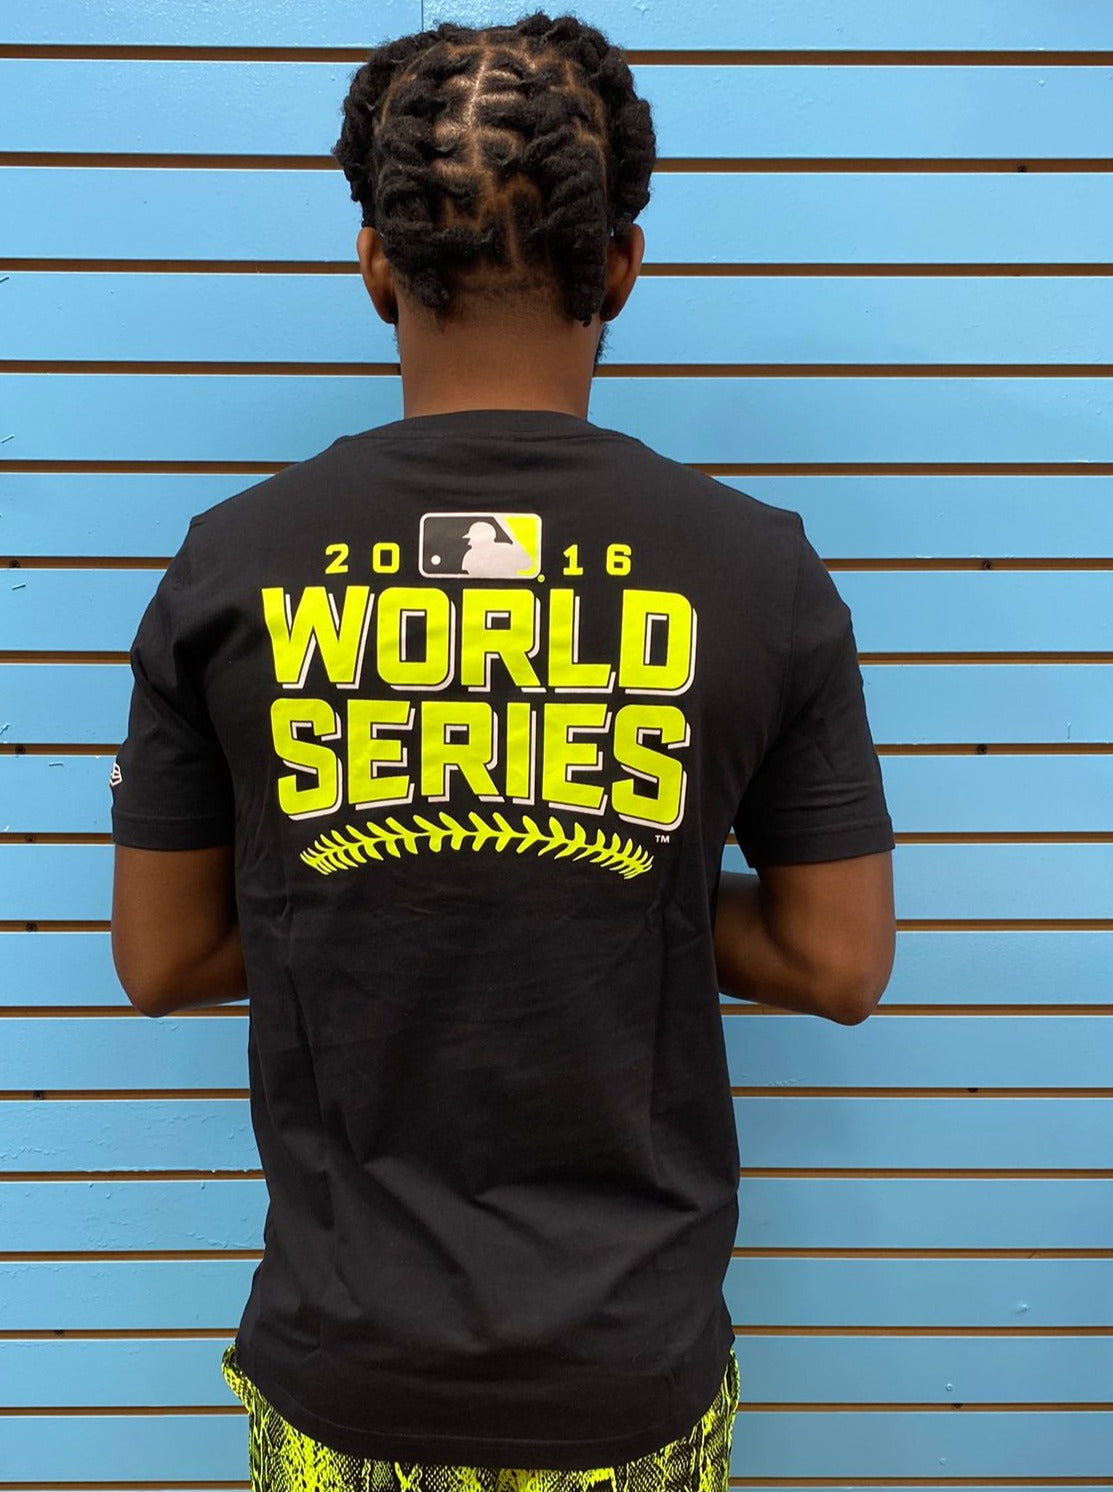 Cubs World Series gear in stock at local stores